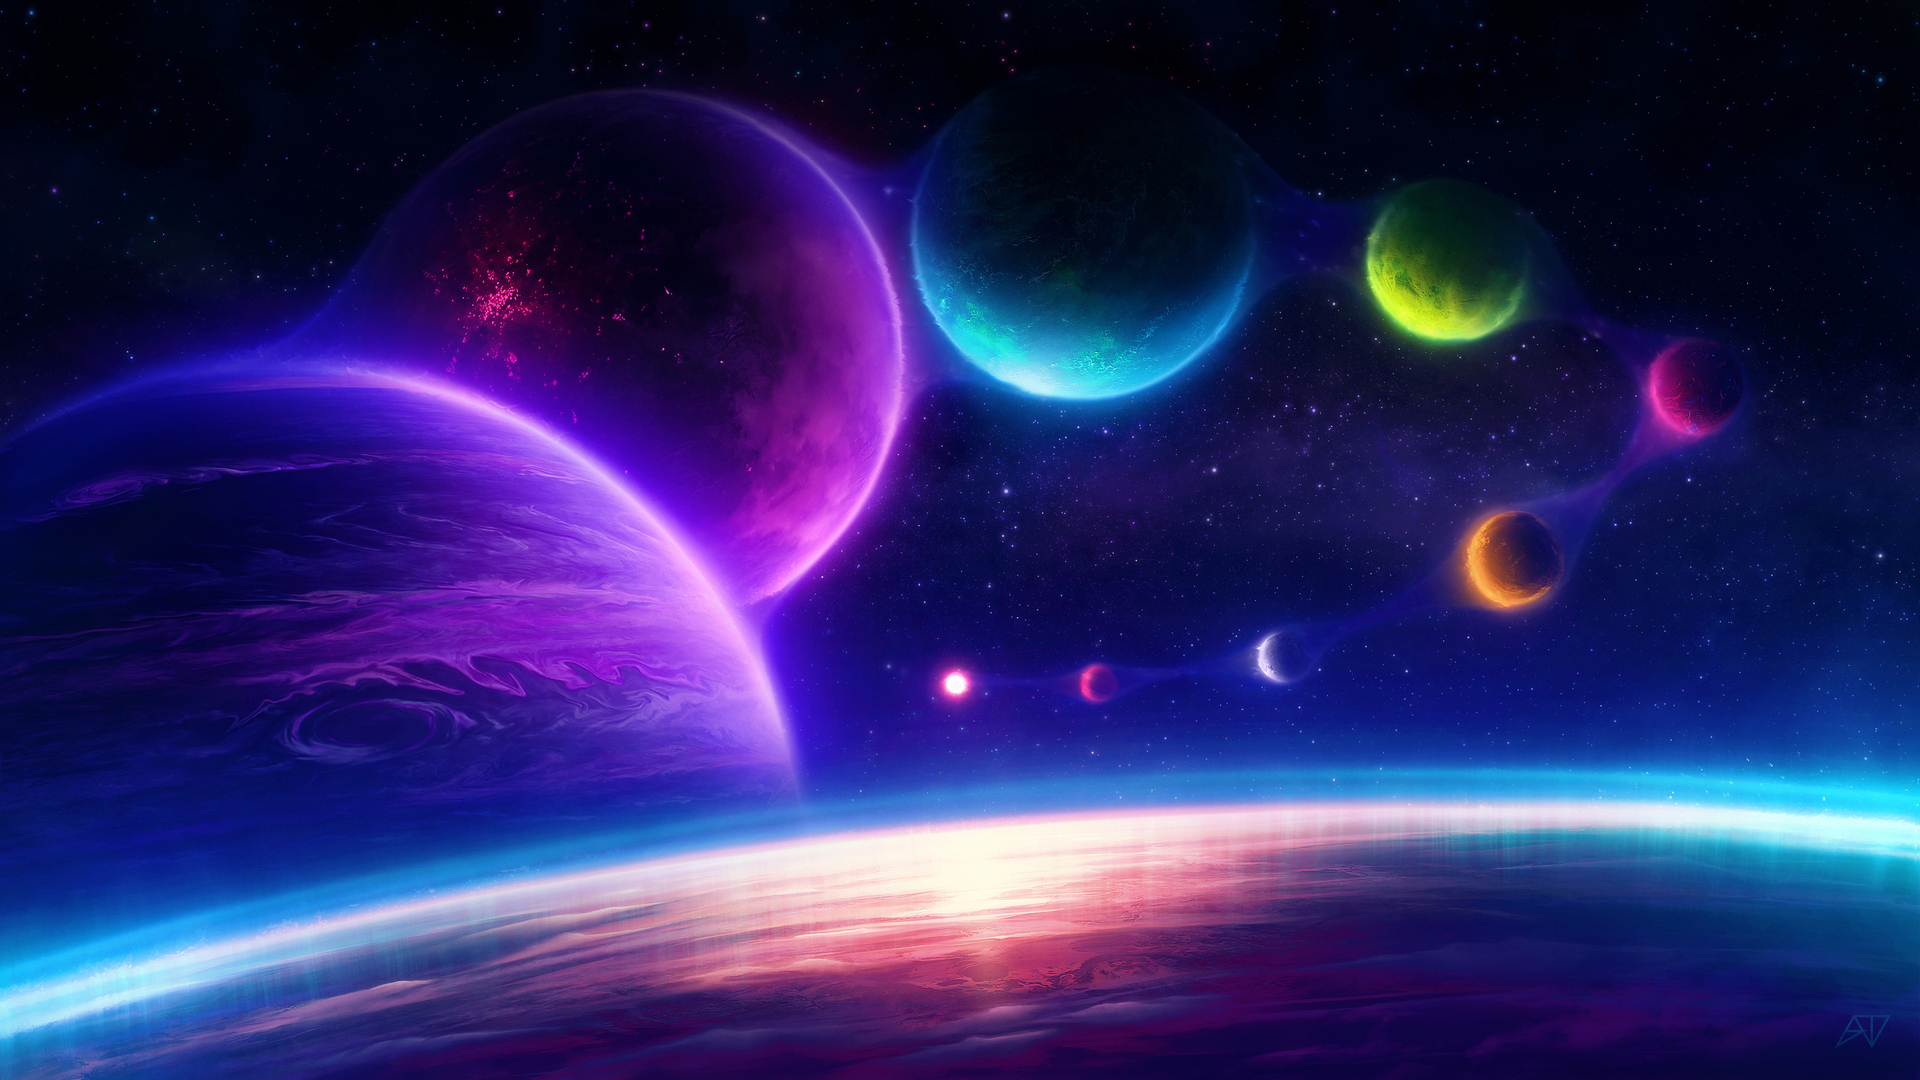 Abstract Space Colorful Planets Chill Desktop Wallpaper